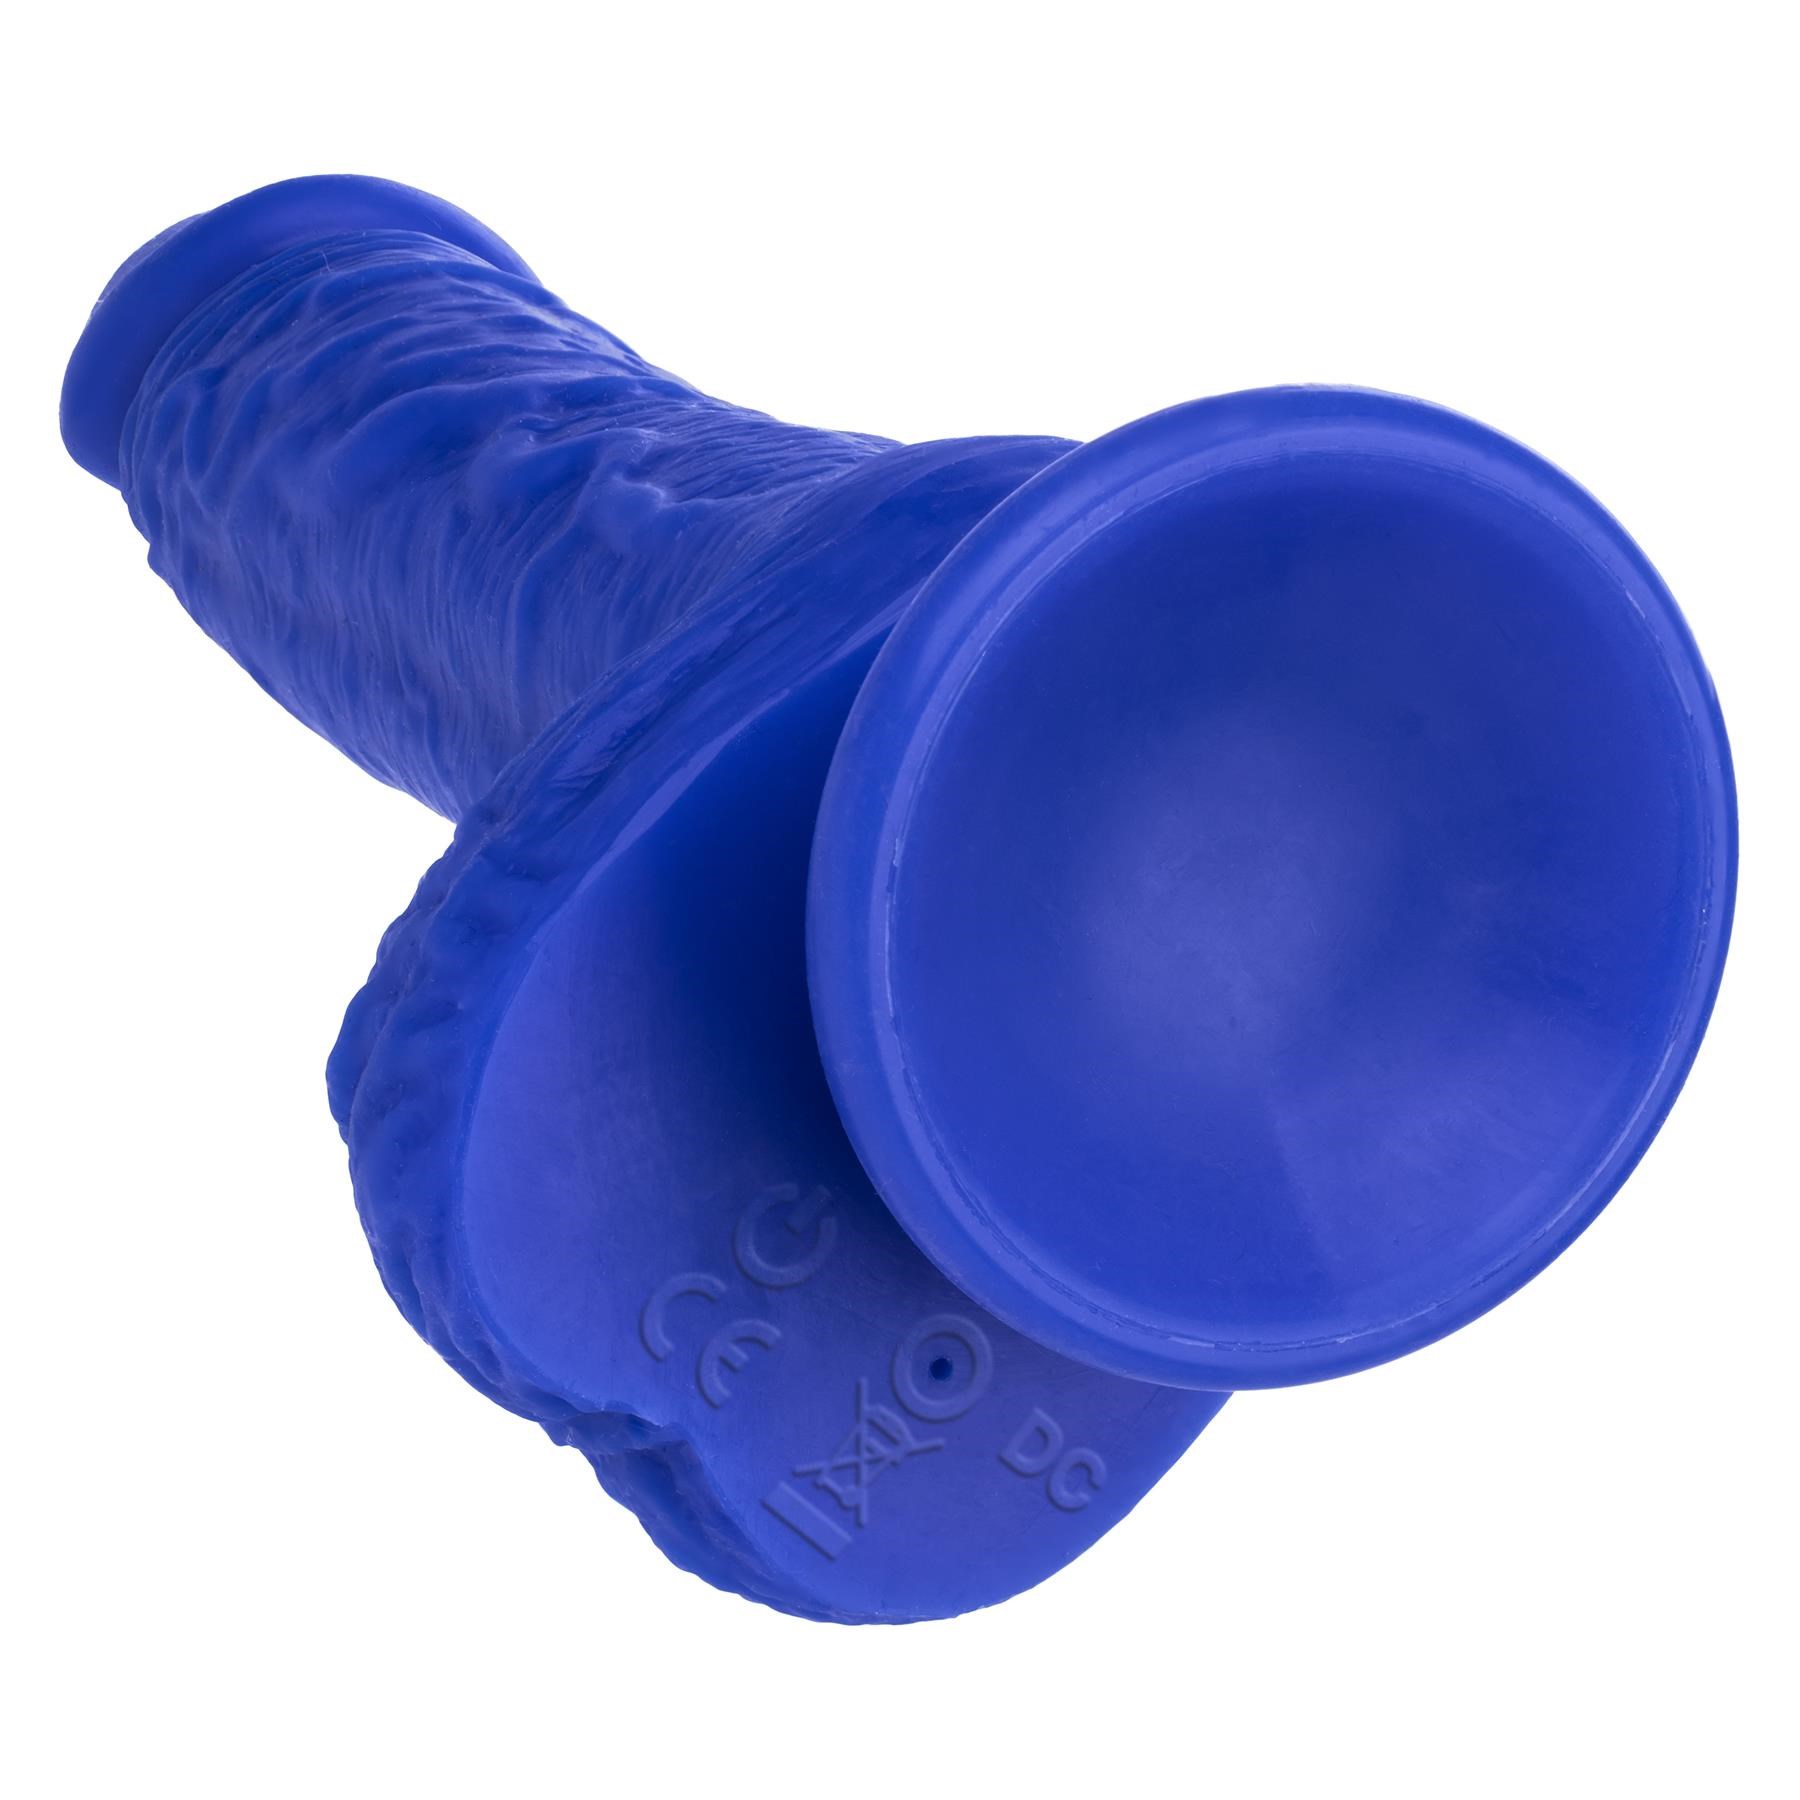 Admiral 7 Inch Vibrating Sailor Dildo - Product Shot - Showing Suction Cup